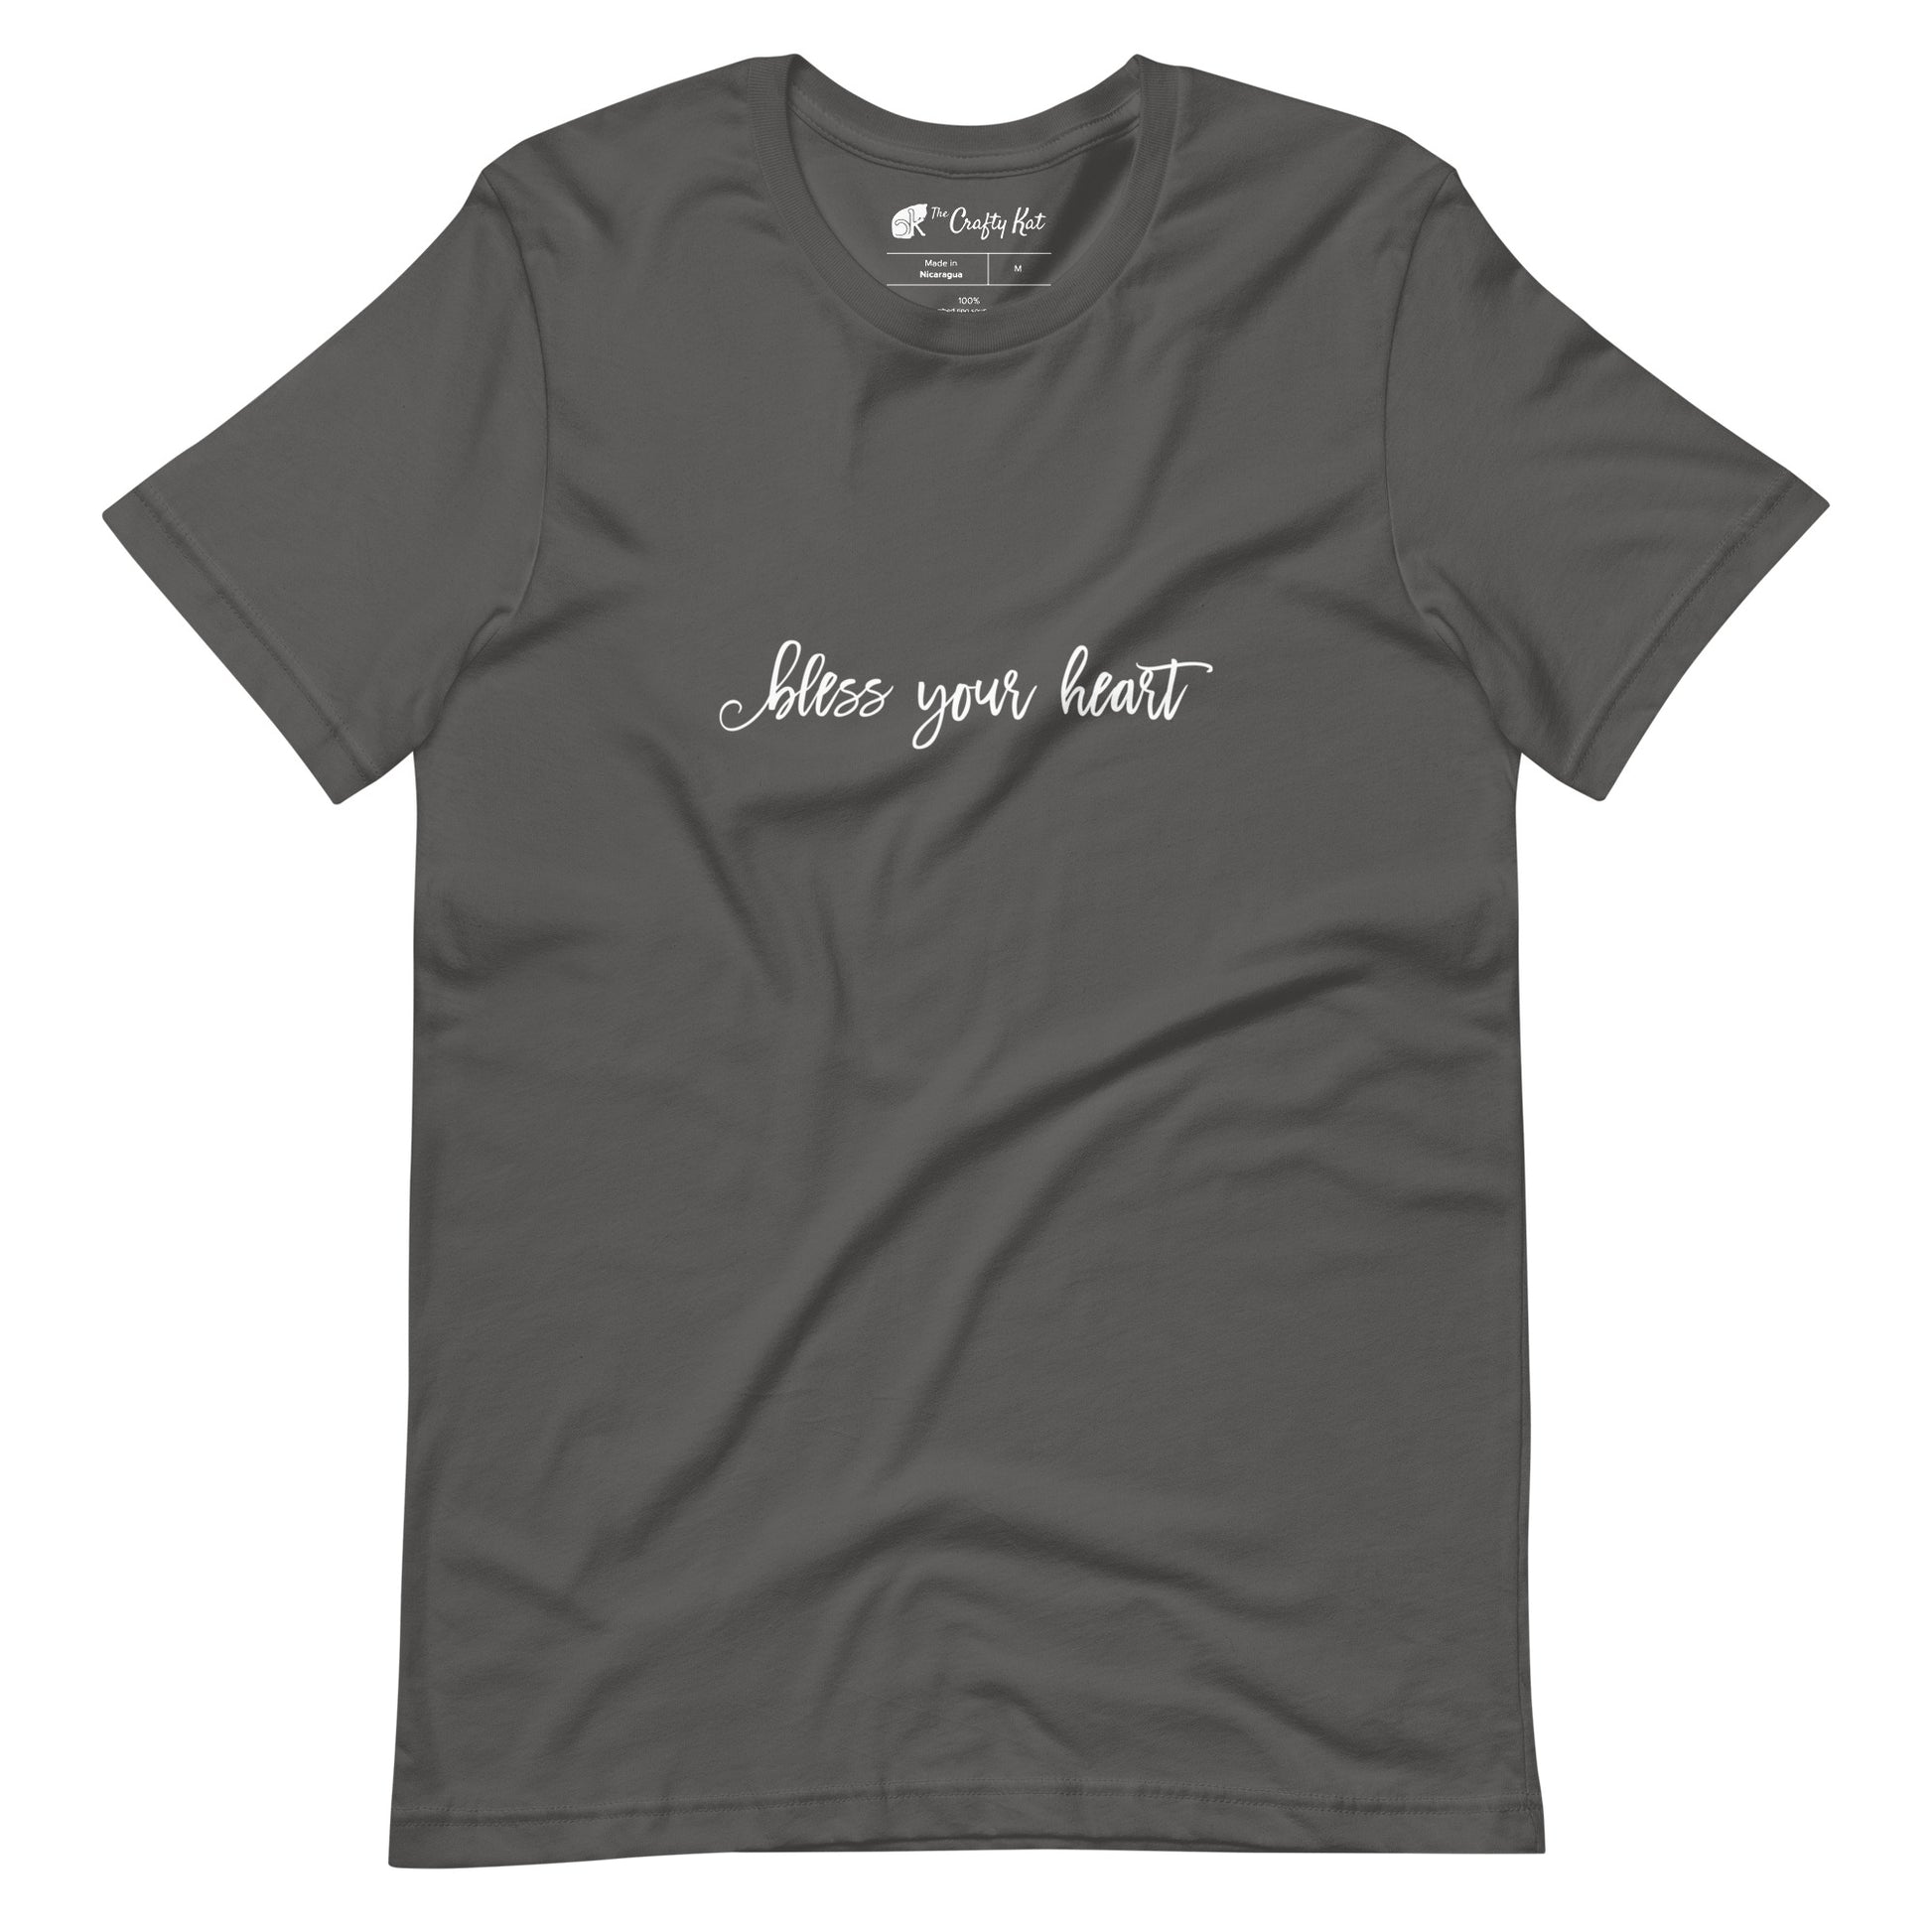 Asphalt grey t-shirt with white graphic in an excessively twee font: "bless your heart"